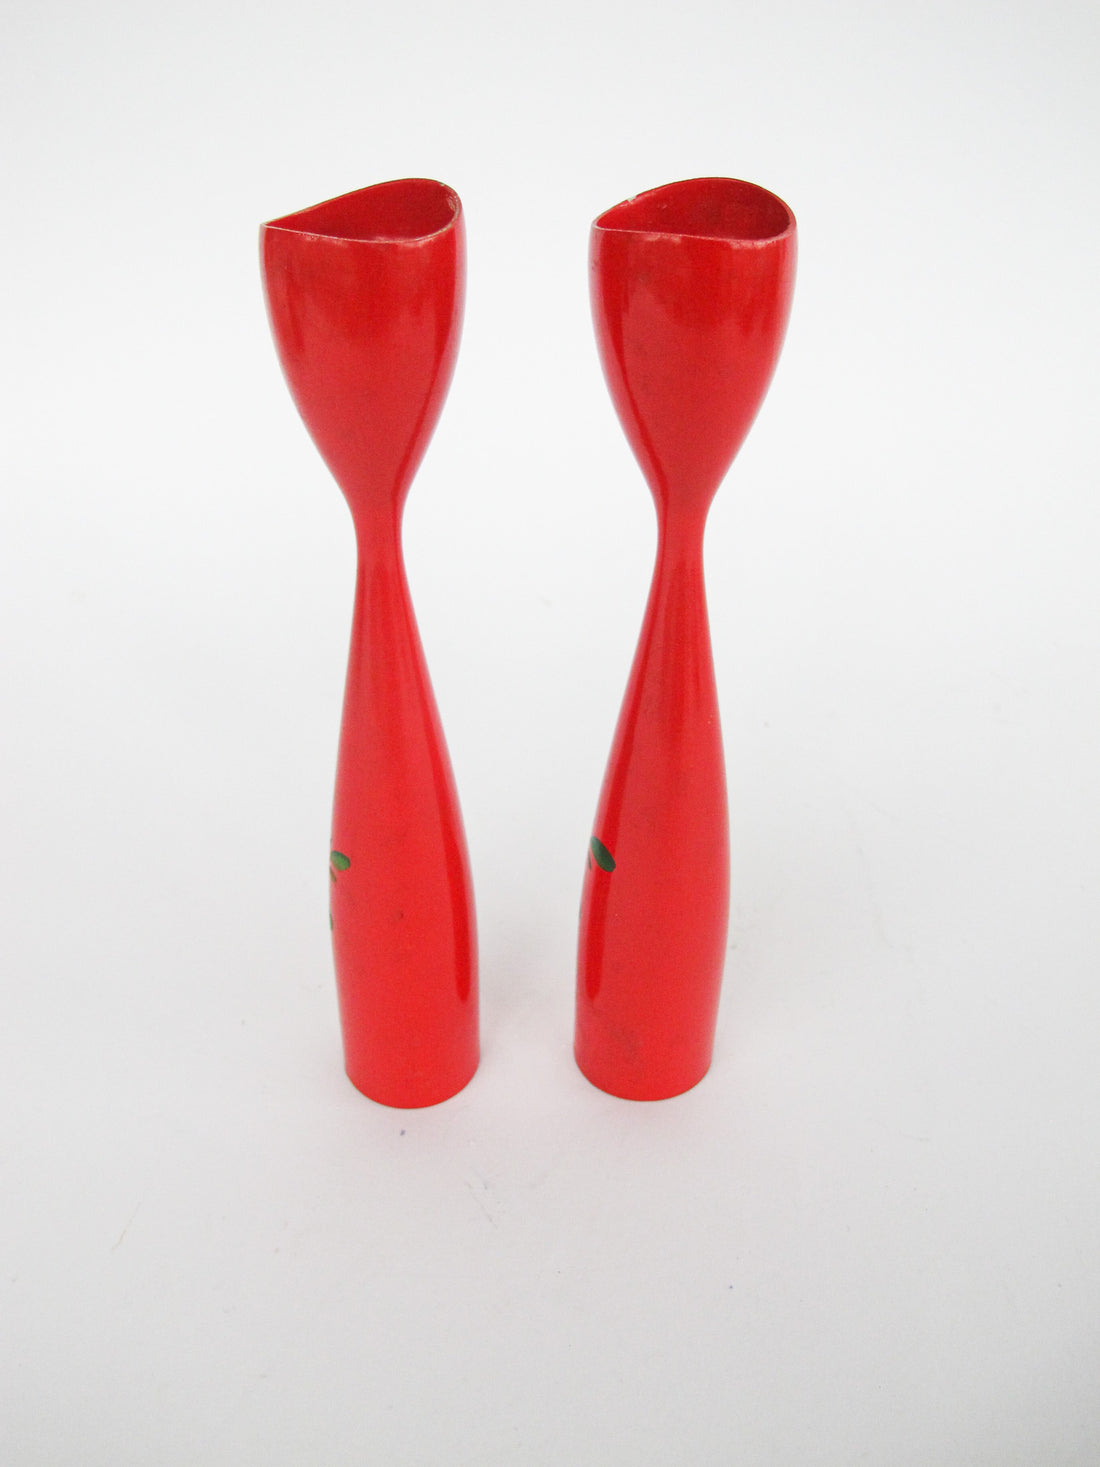 Set of 2 Midcentury Red Candlesticks with Floral painted detailing - Marked Denmark